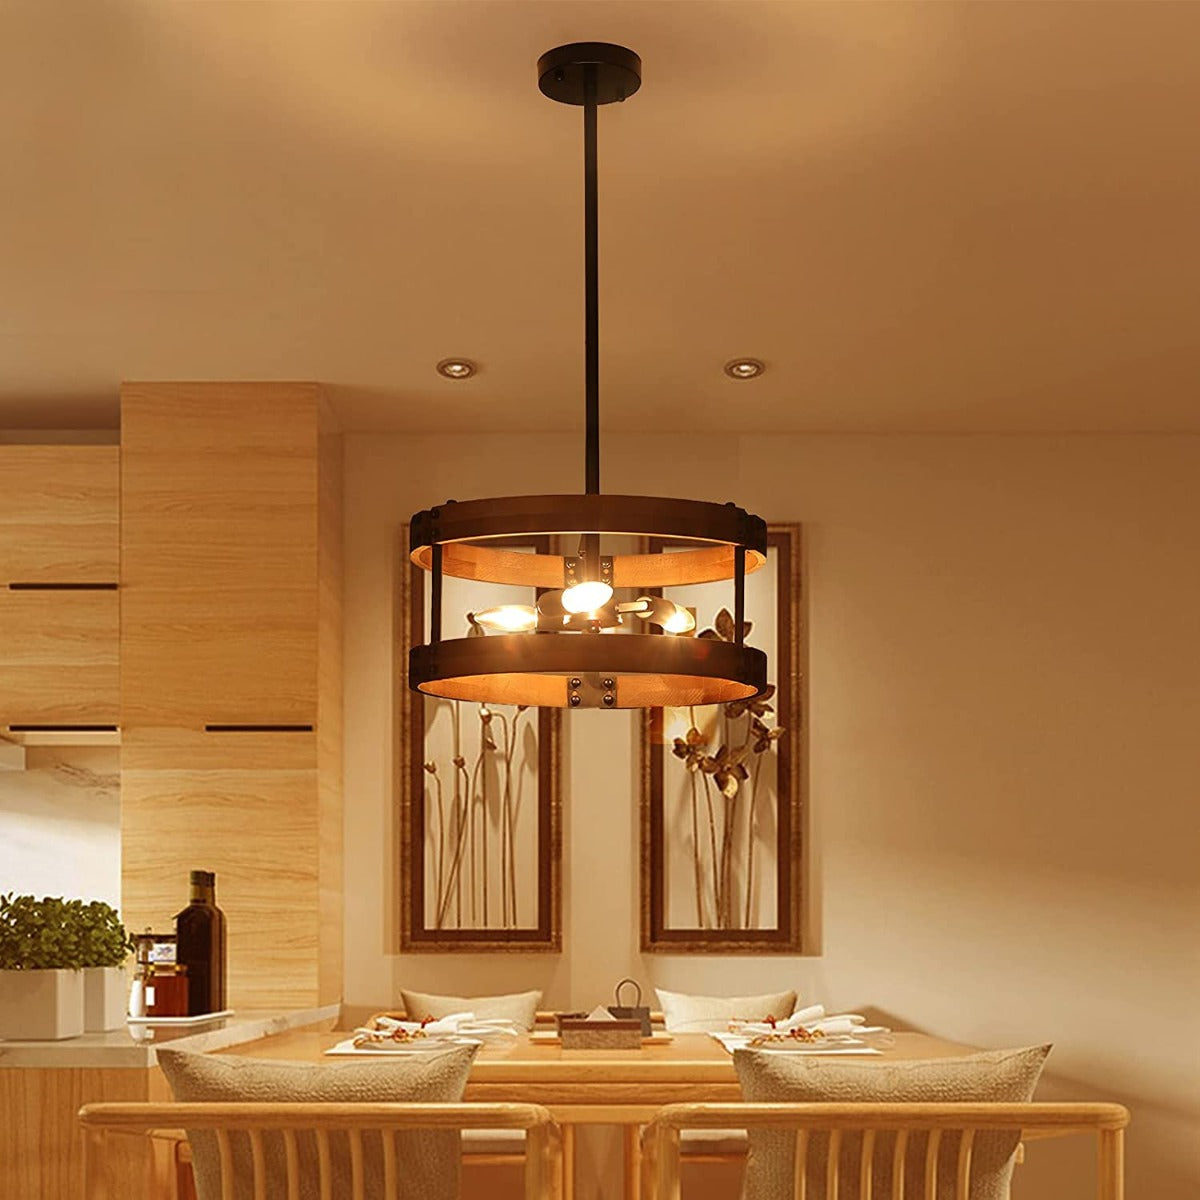 Open Drum Farmhouse pendant light with wood finish shown hanging over dining table